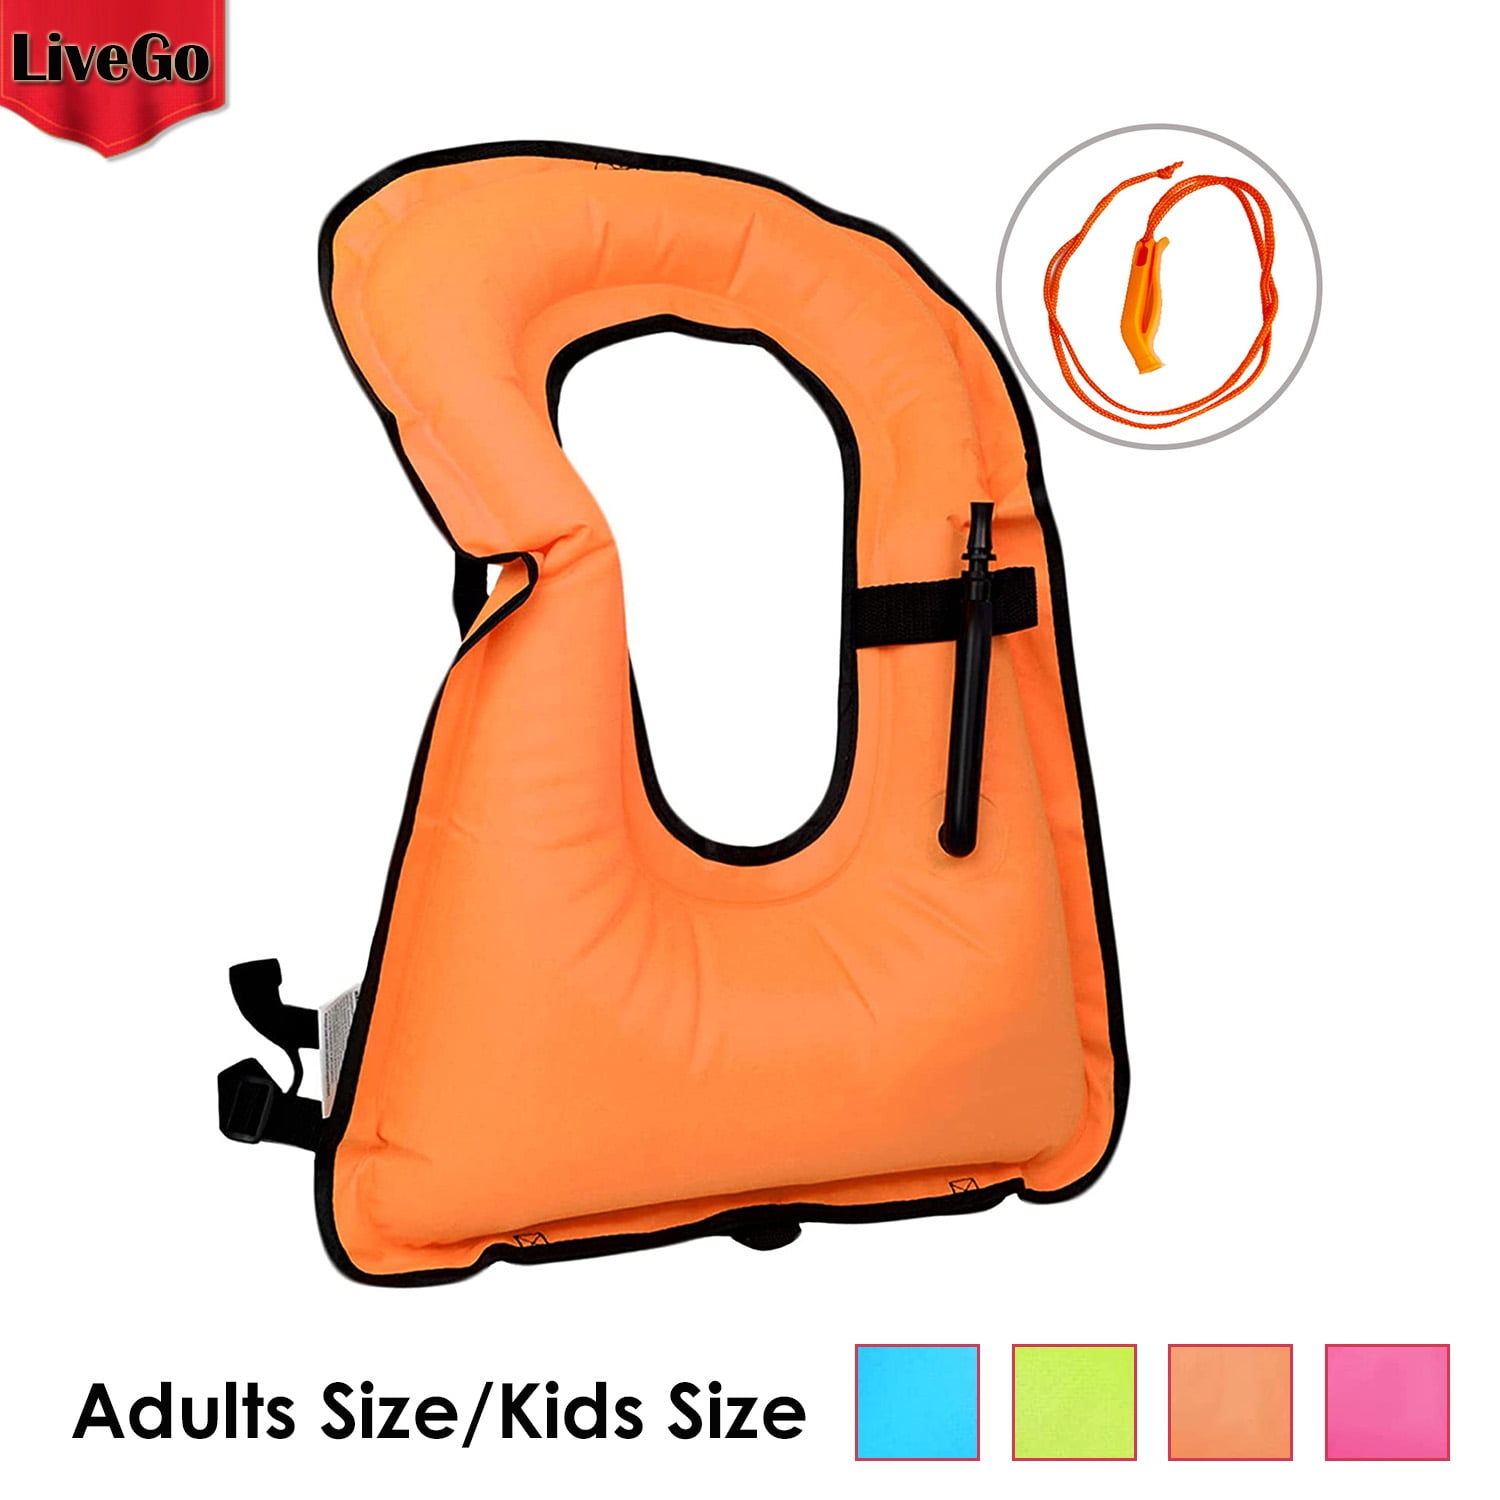 Snorkel Life Vest Life Jackets for Adults Swim Jackets Kayak Buoyancy Vest Portable Floatage Vests for Diving Surfing Swimming Outdoor Water Sports 